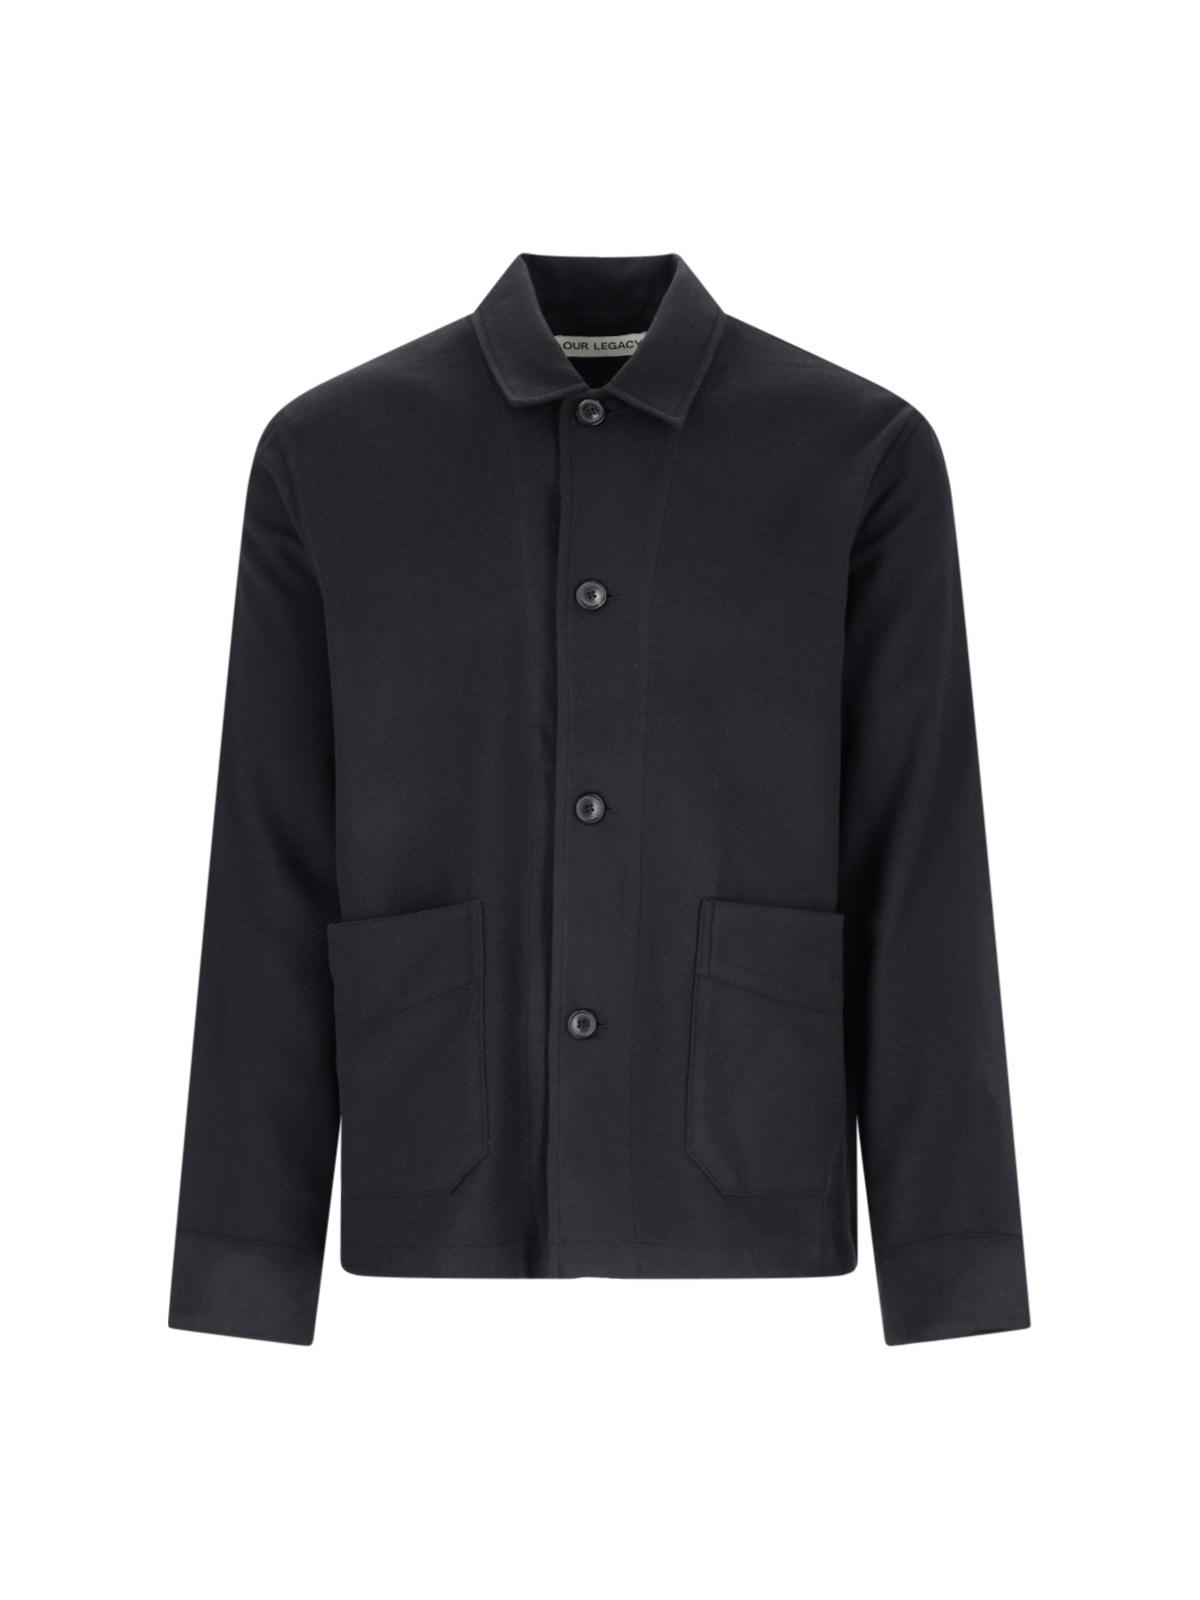 OUR LEGACY ARCHIVE BOX JACKET BLACK WOOL